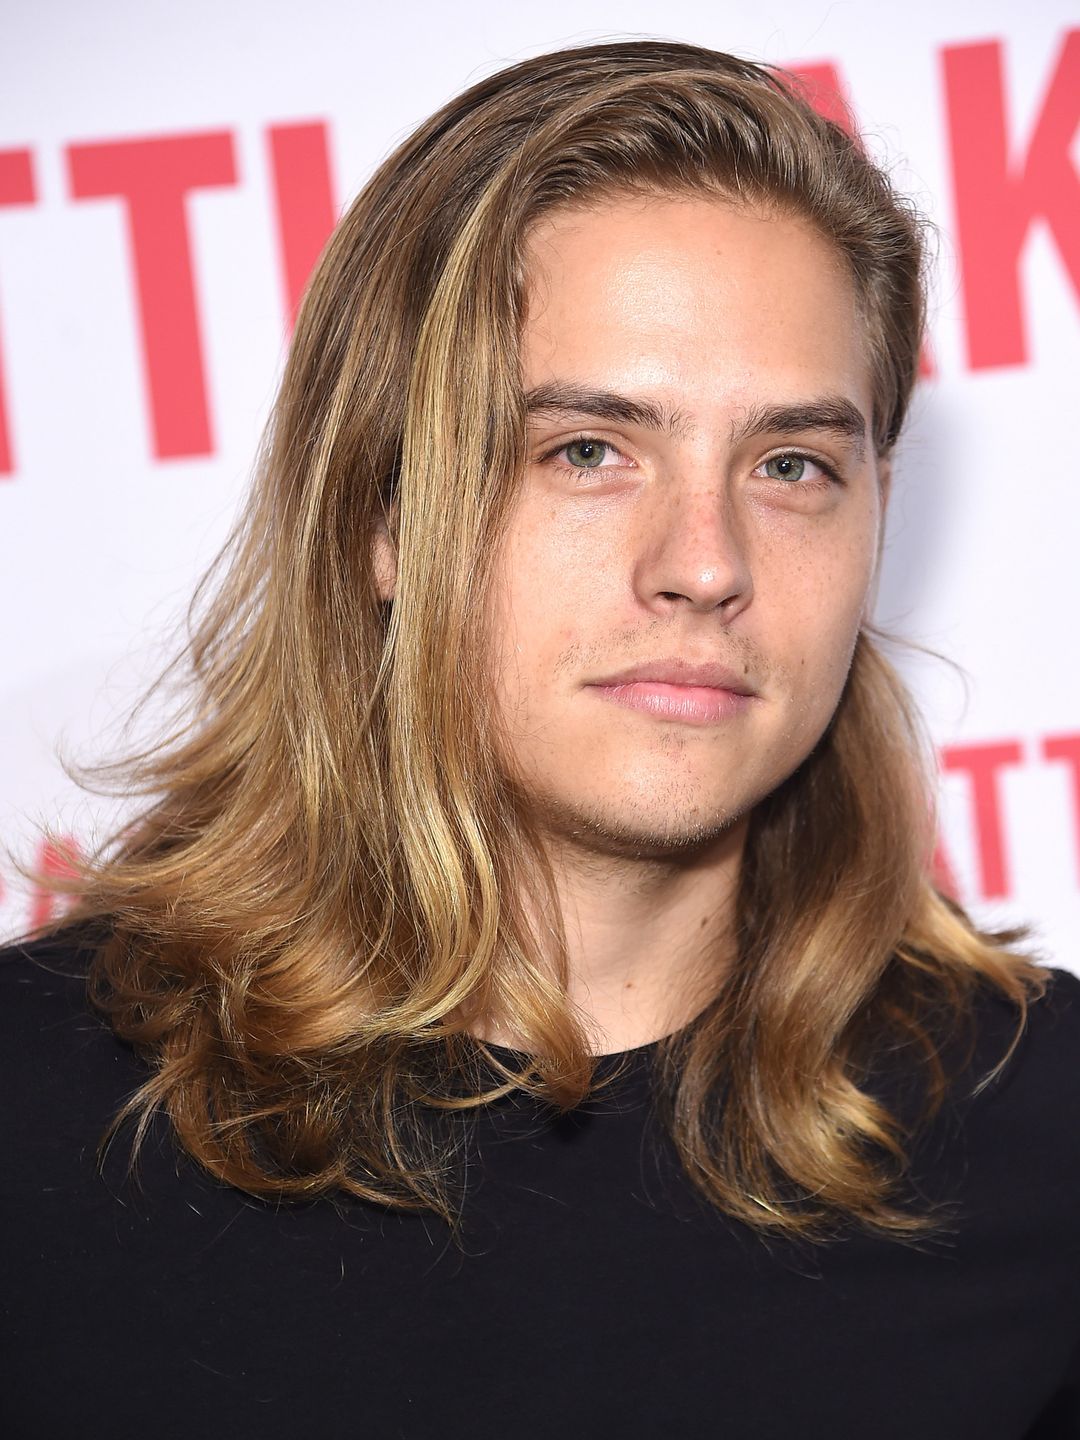 Dylan Sprouse life story